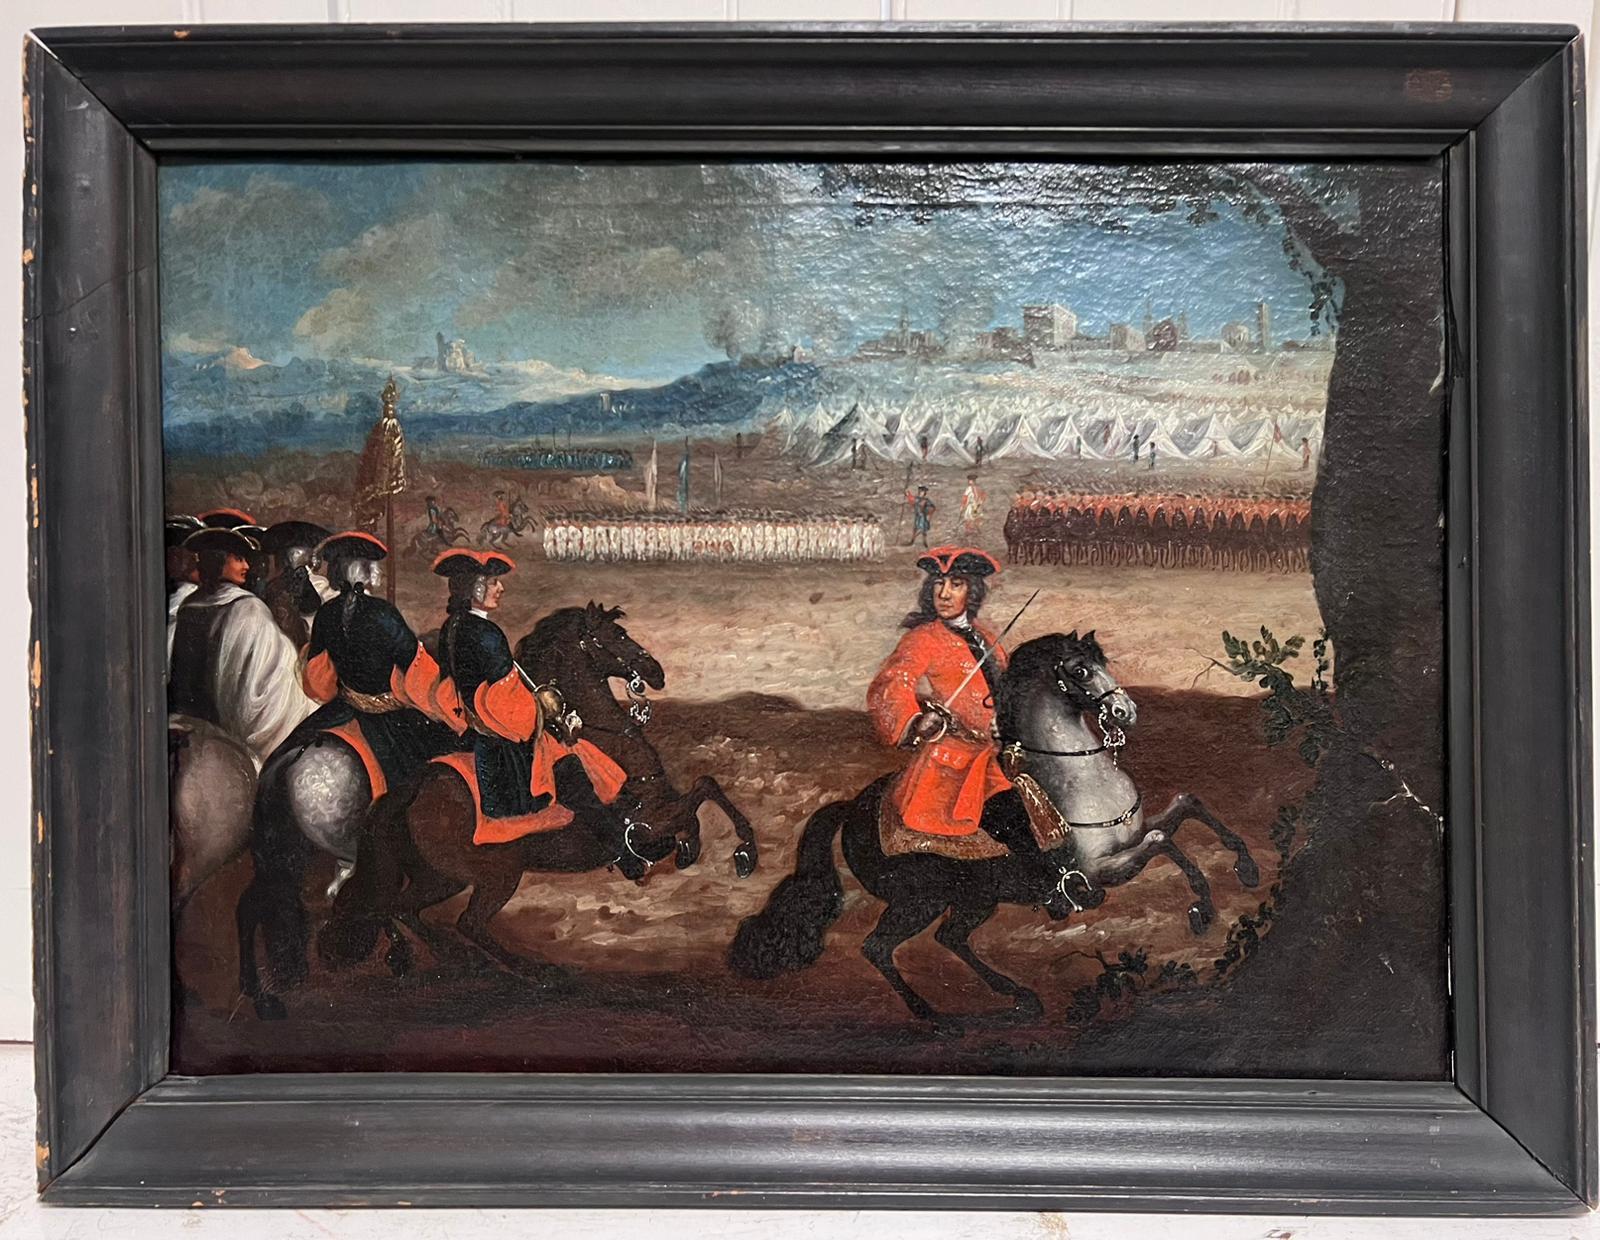 18th Century Cavalry Military Battle Encampment Soldiers on Horseback French Oil - Painting by 1700's French Old Master